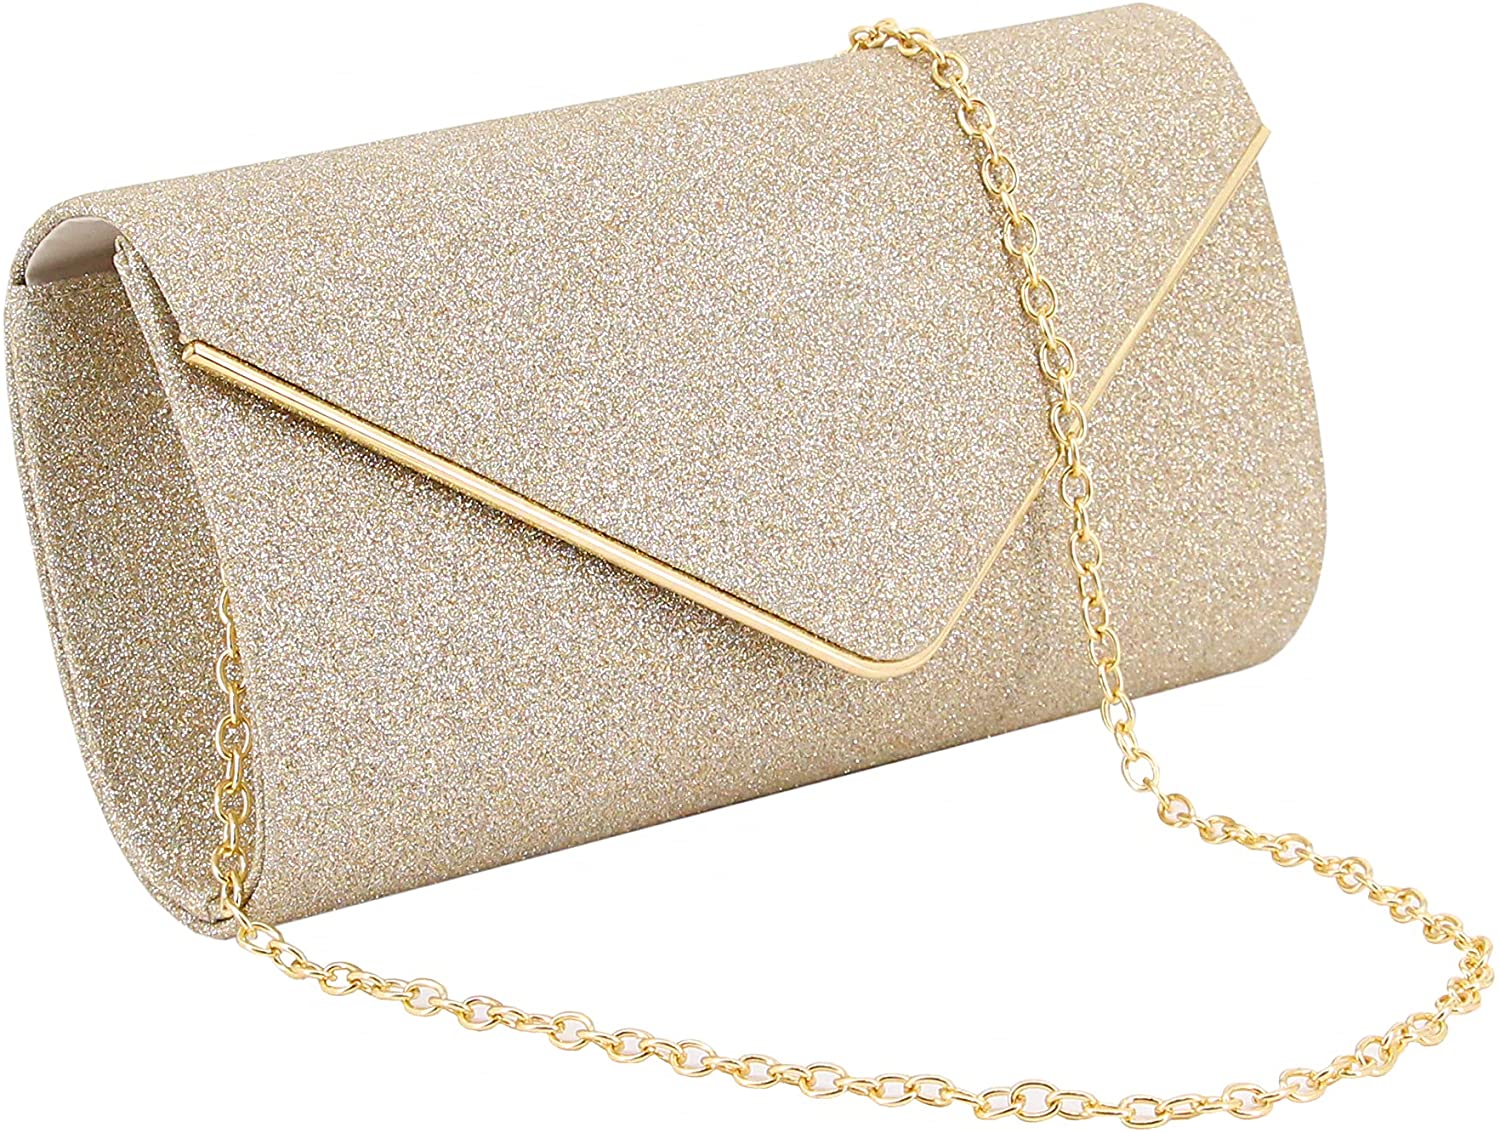 Naimo Flap Dazzling Small Clutch Bag Evening Bag With Detachable